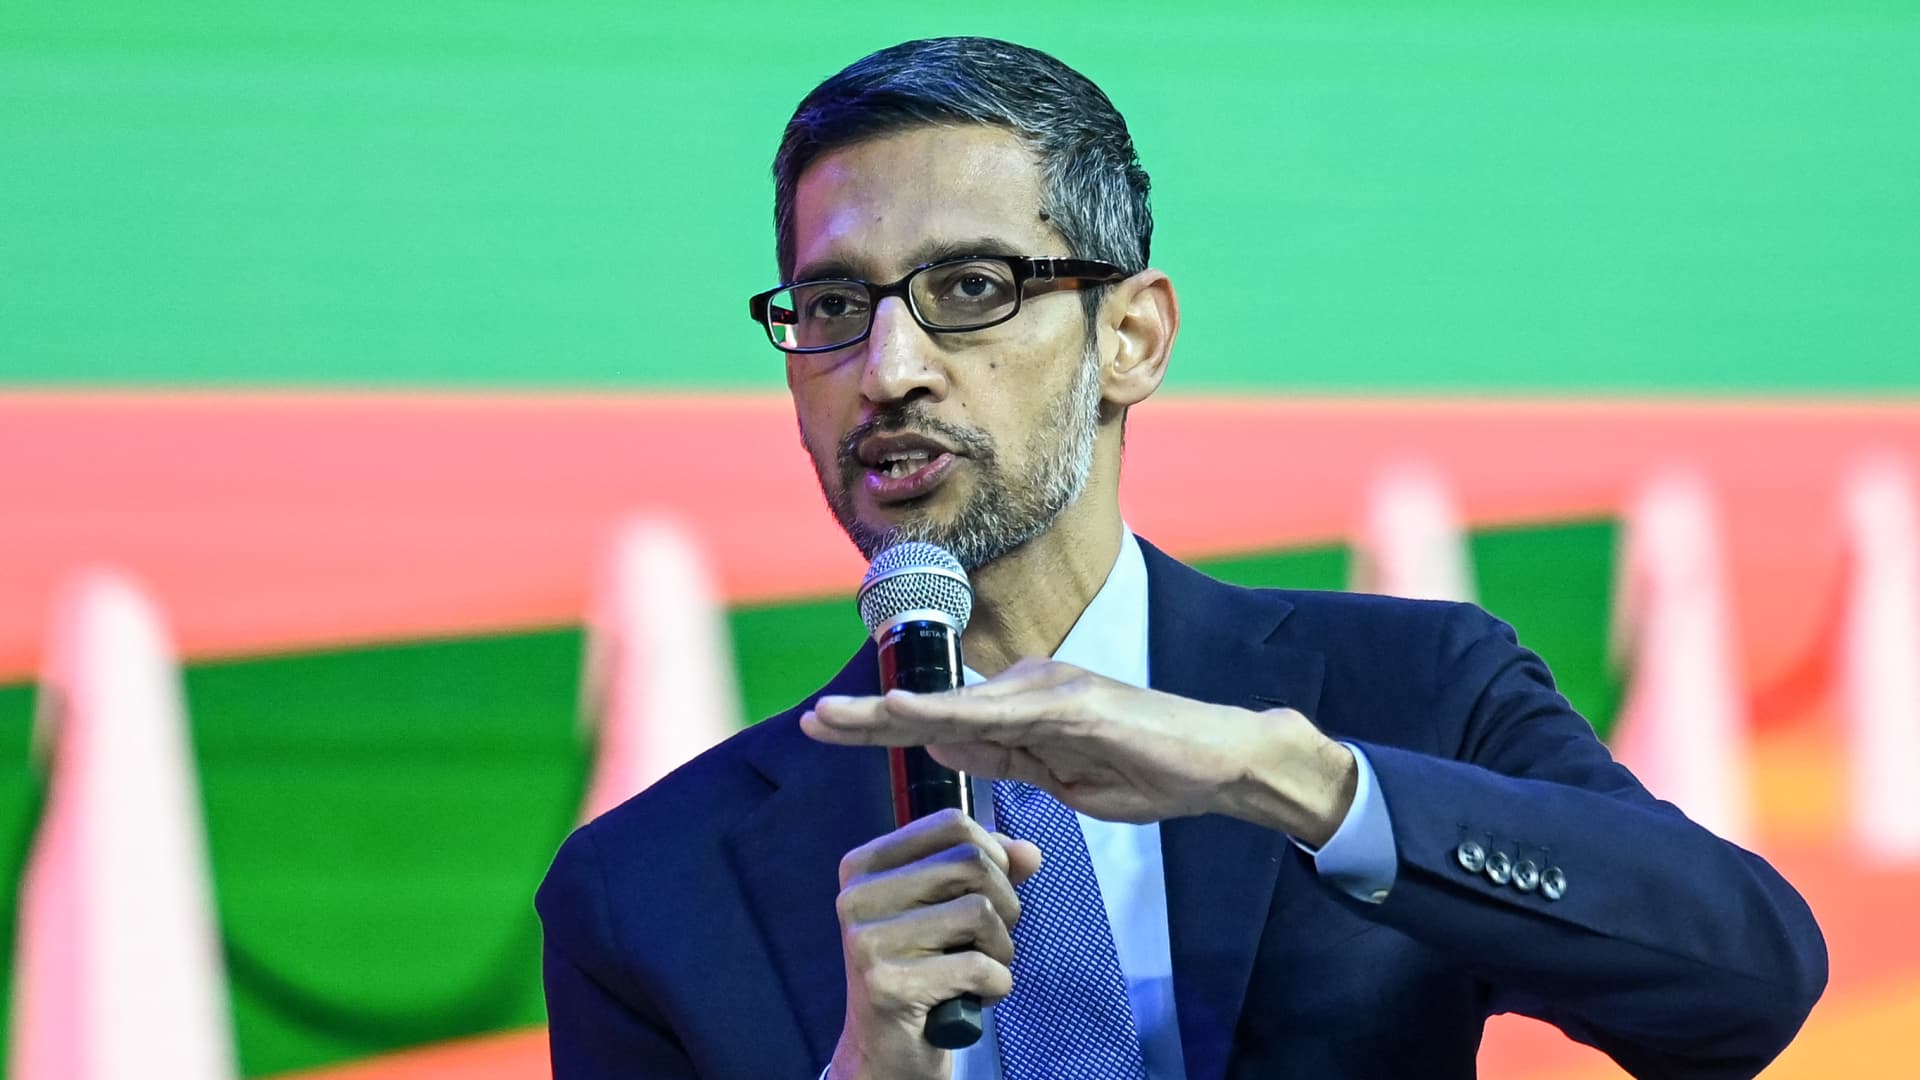 Google tells employees that fewer of them will get promotions to senior roles